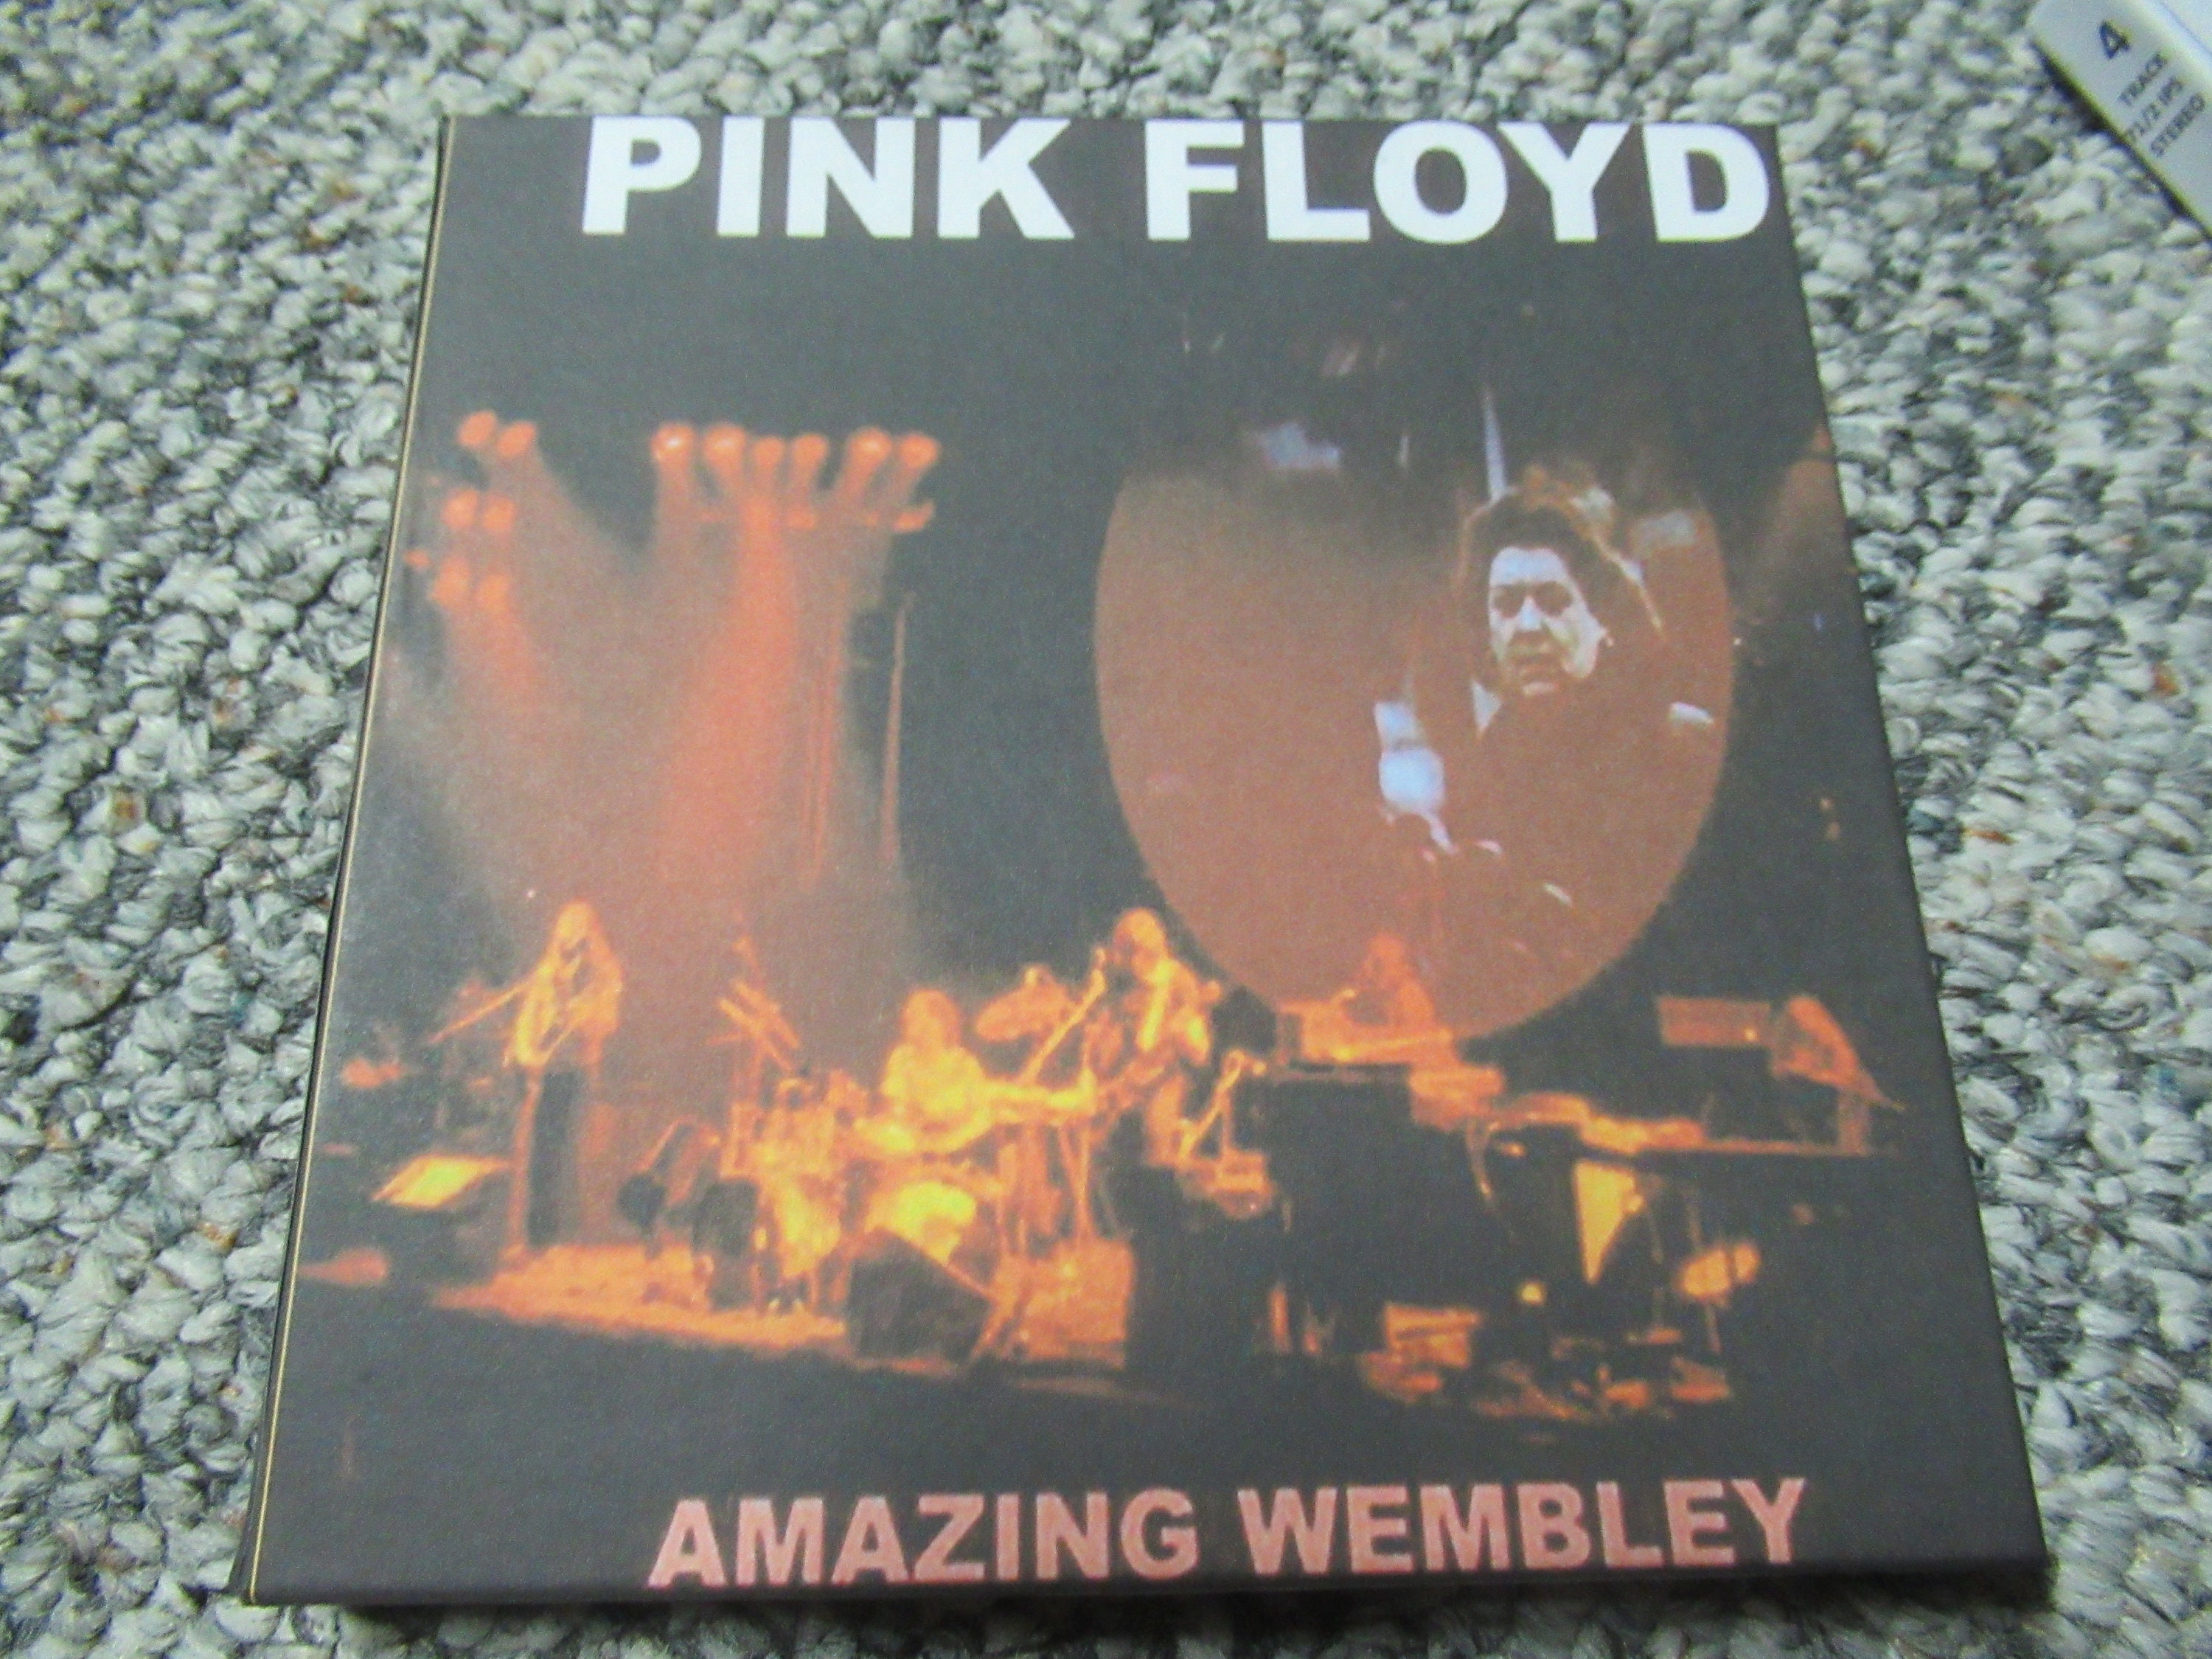 Pink Floyd Live at Wembley 71/2 IPS 4track Reel to Reel Tape -  Canada